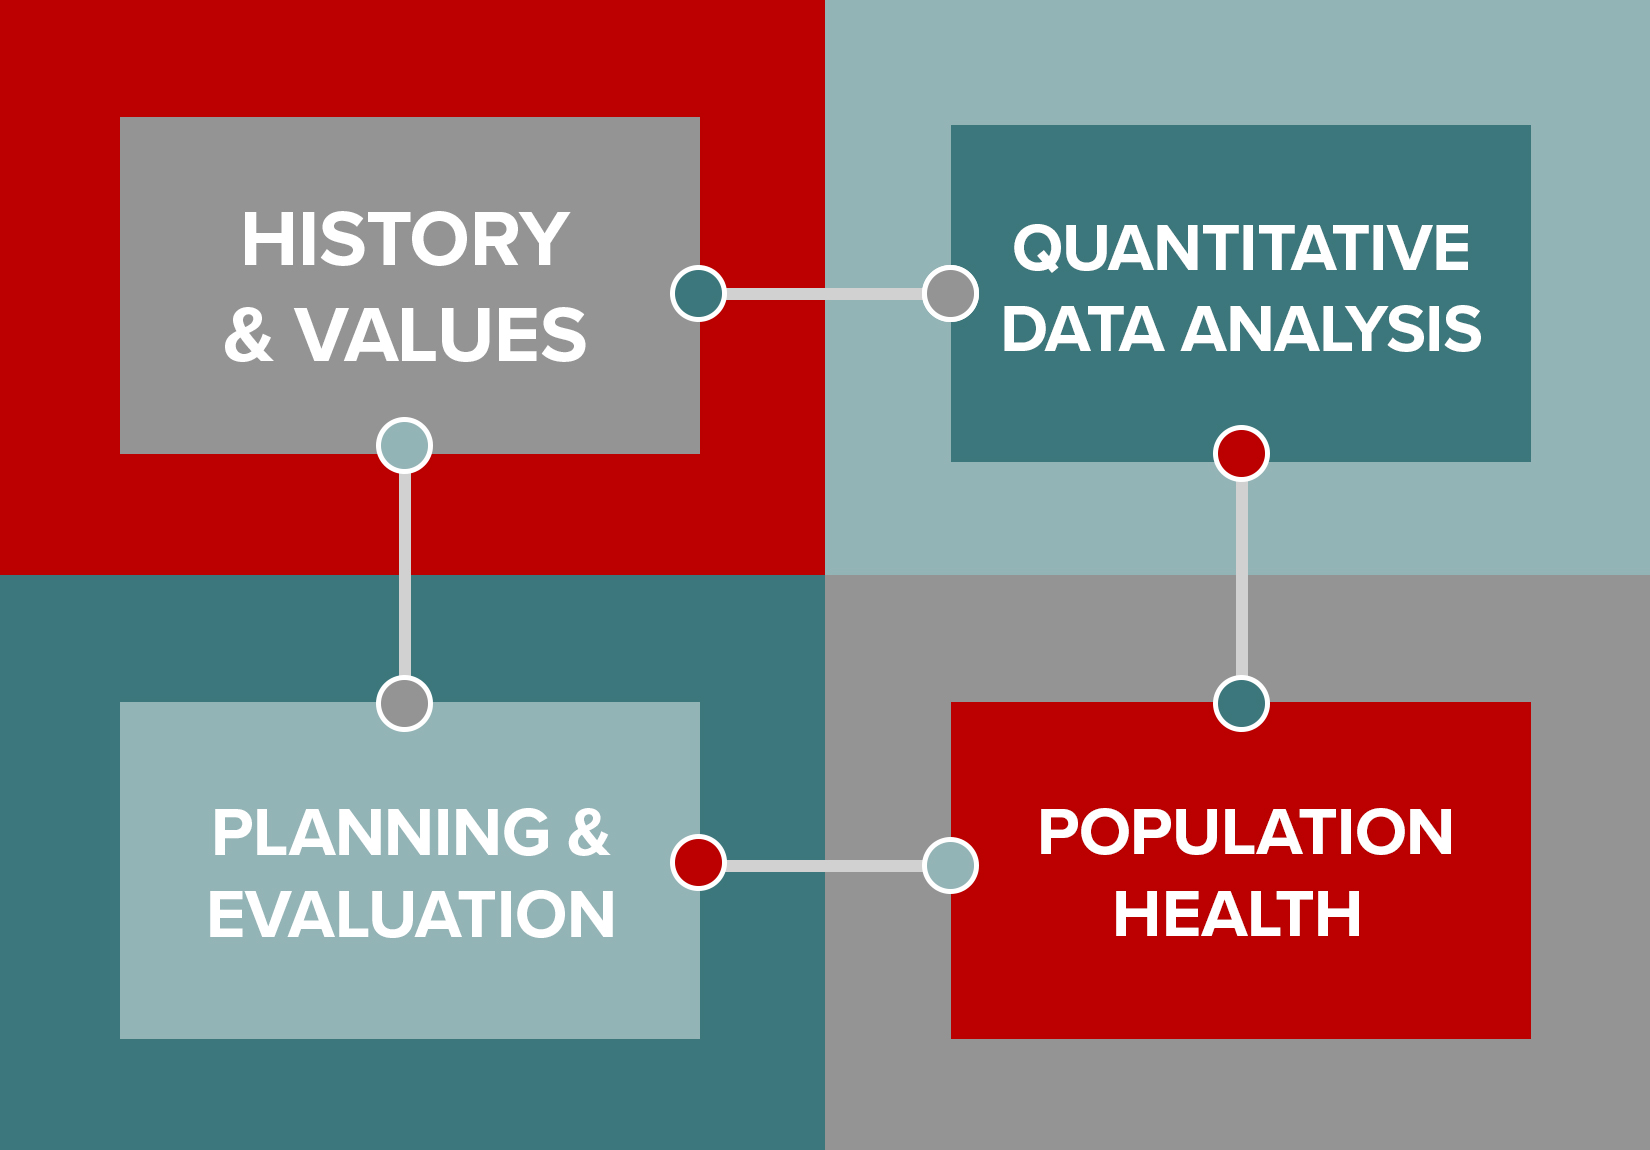 The MPH Integrated Curriculum includes courses on history and values, data analysis, planning and evaluation, and population health.